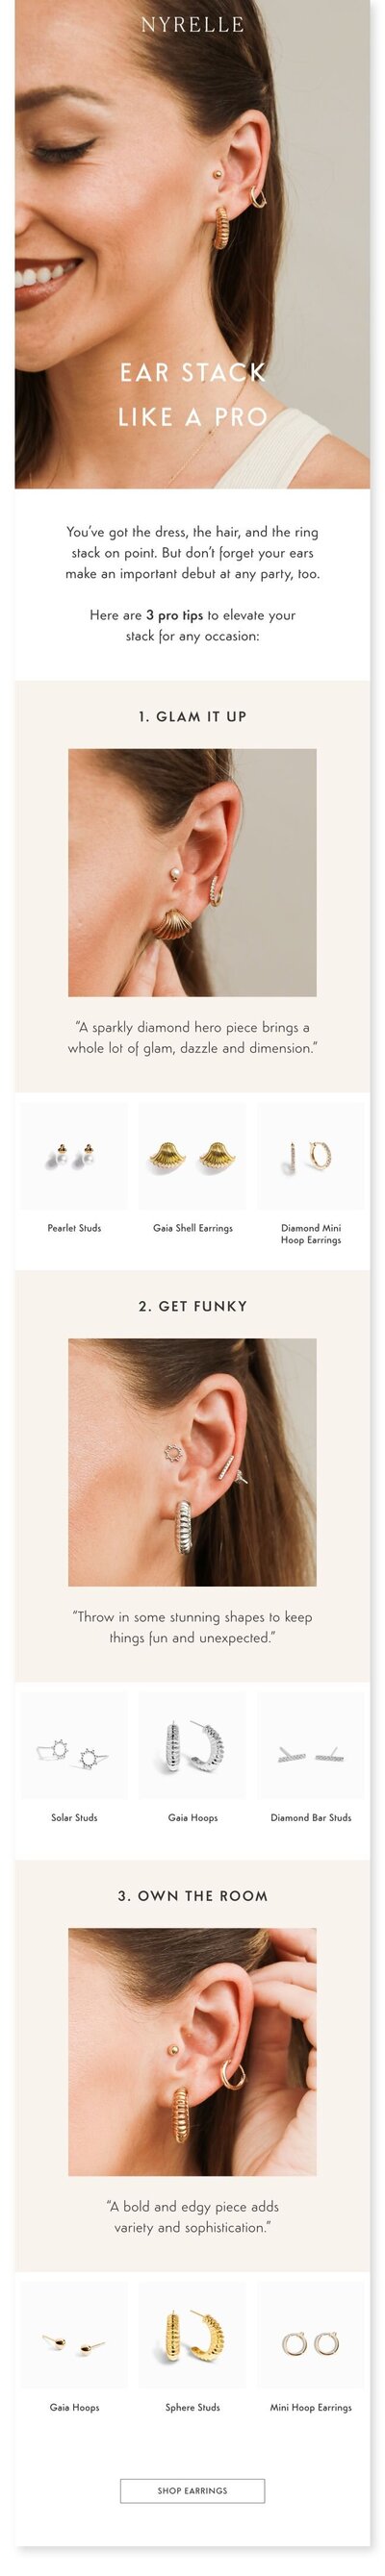 E-commerce Email Newsletter Design by Graphic Designer in Hong Kong Kyra Janelle – Fashionable Ear Stacking Guide for NYRELLE Jewelry.